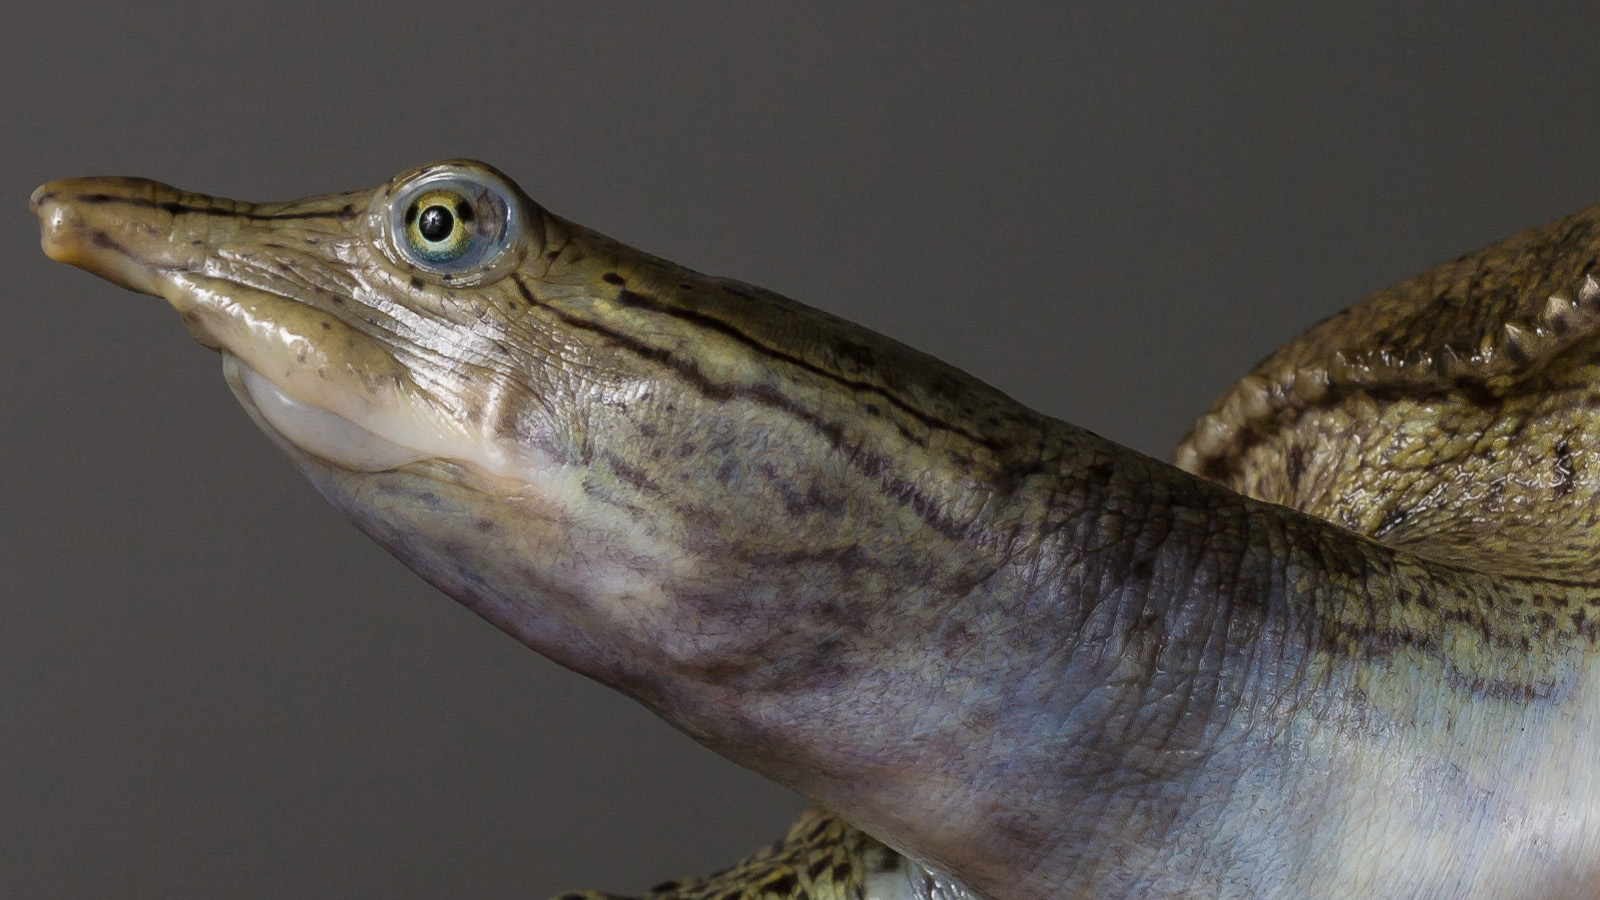 Eastern spiny softshell turtle